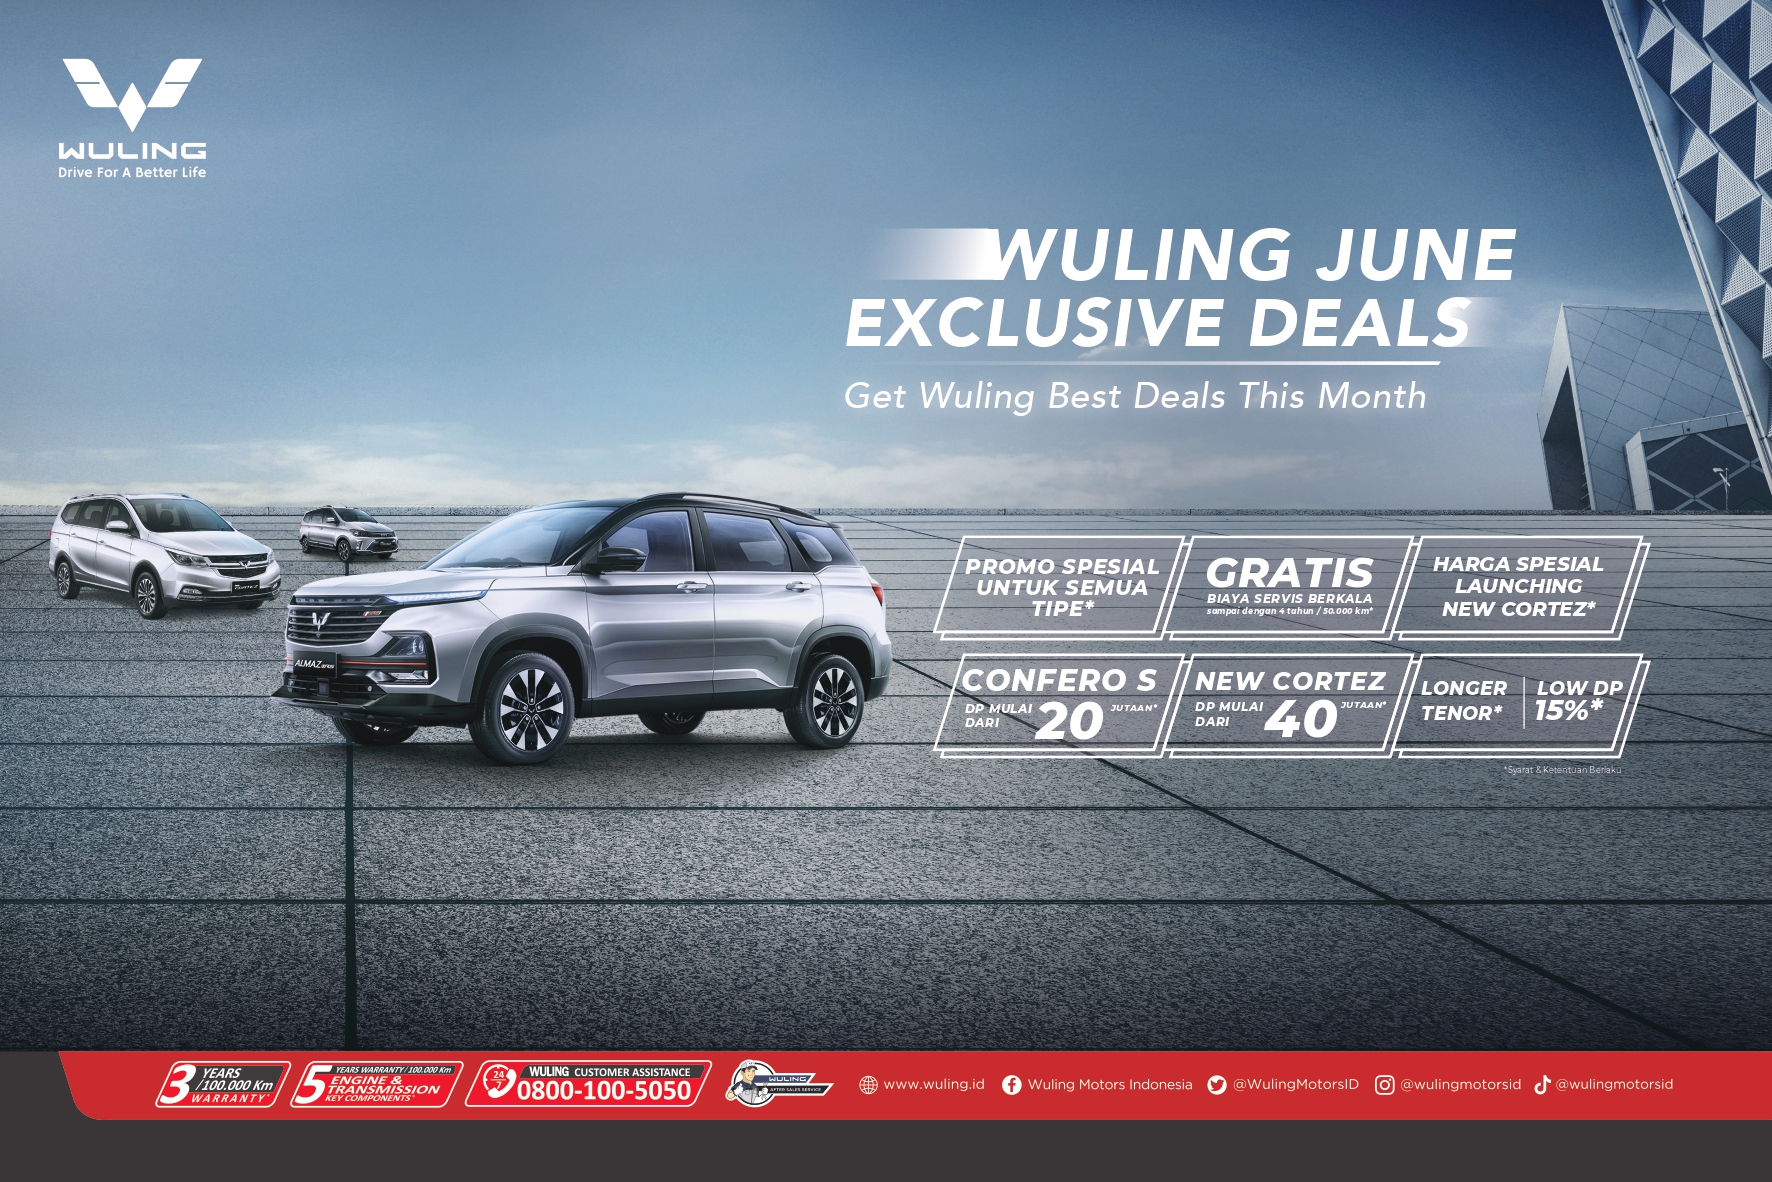 Image Wuling Presents Special Promo ‘Wuling June Exclusive Deals’ in the Middle of the Year